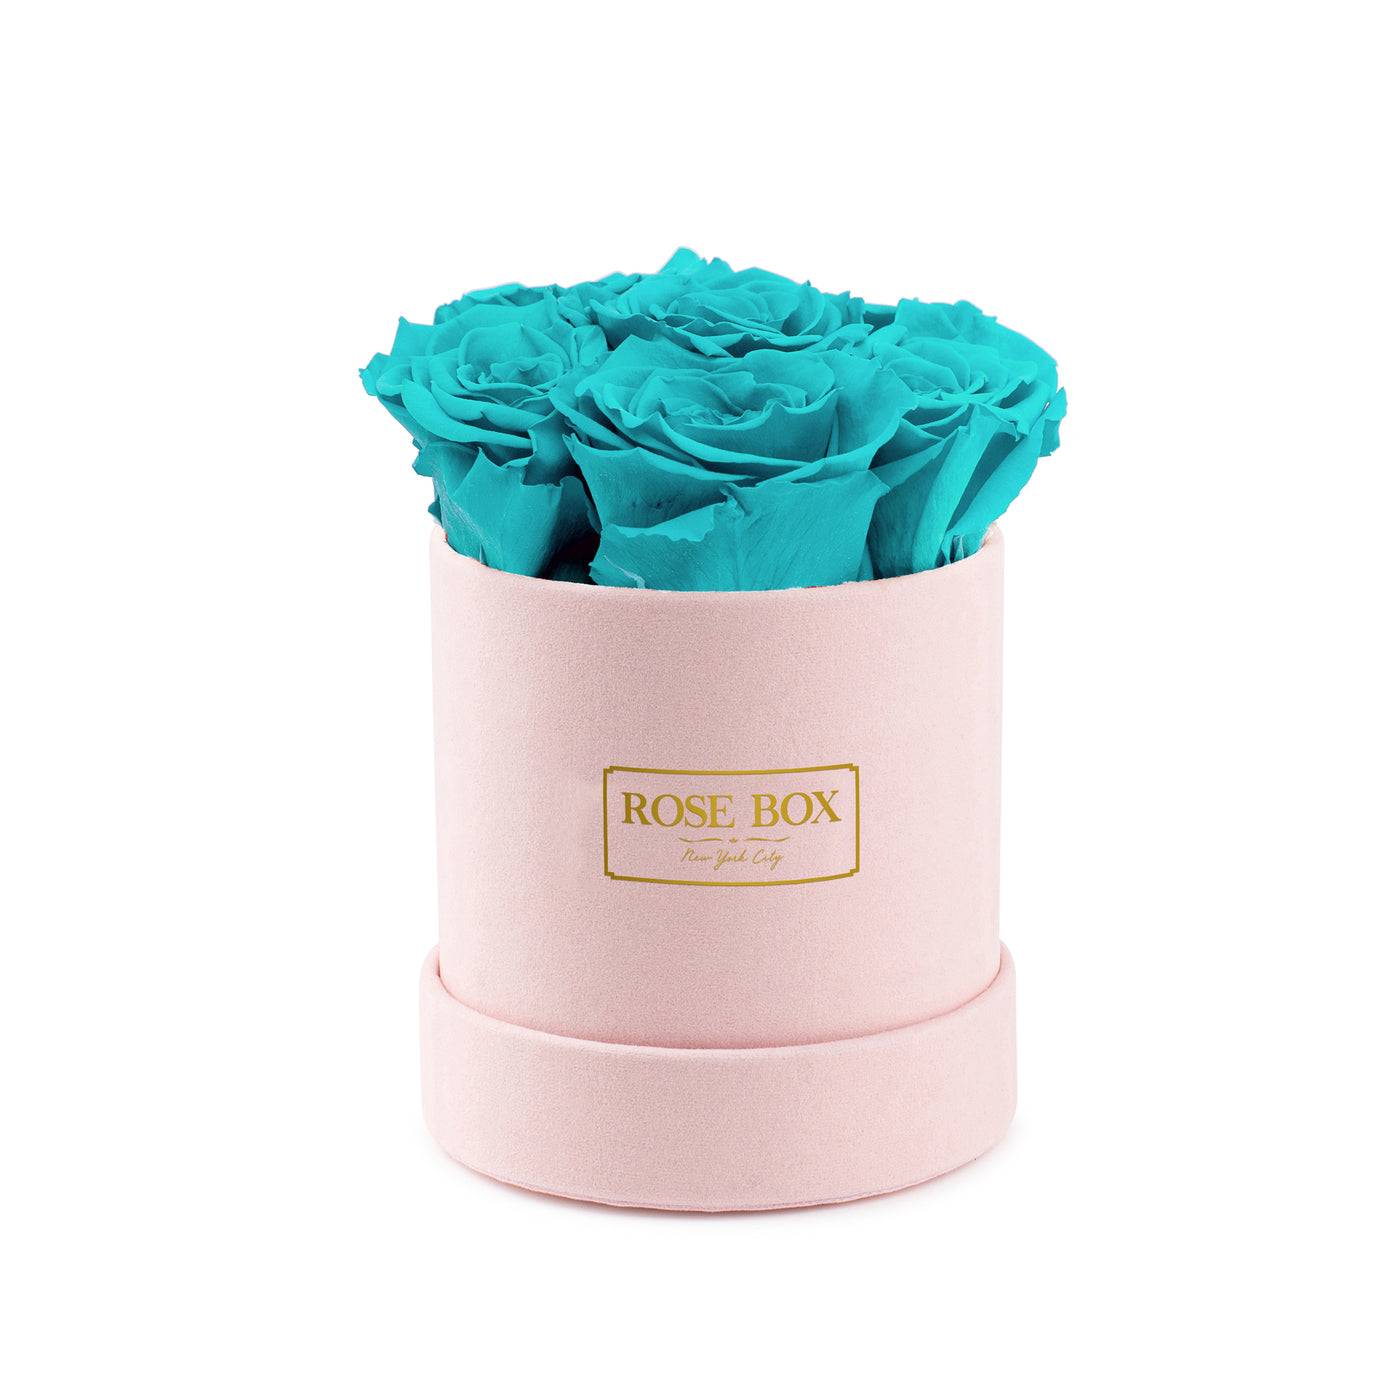 Mini Pink Box with Turquoise Roses